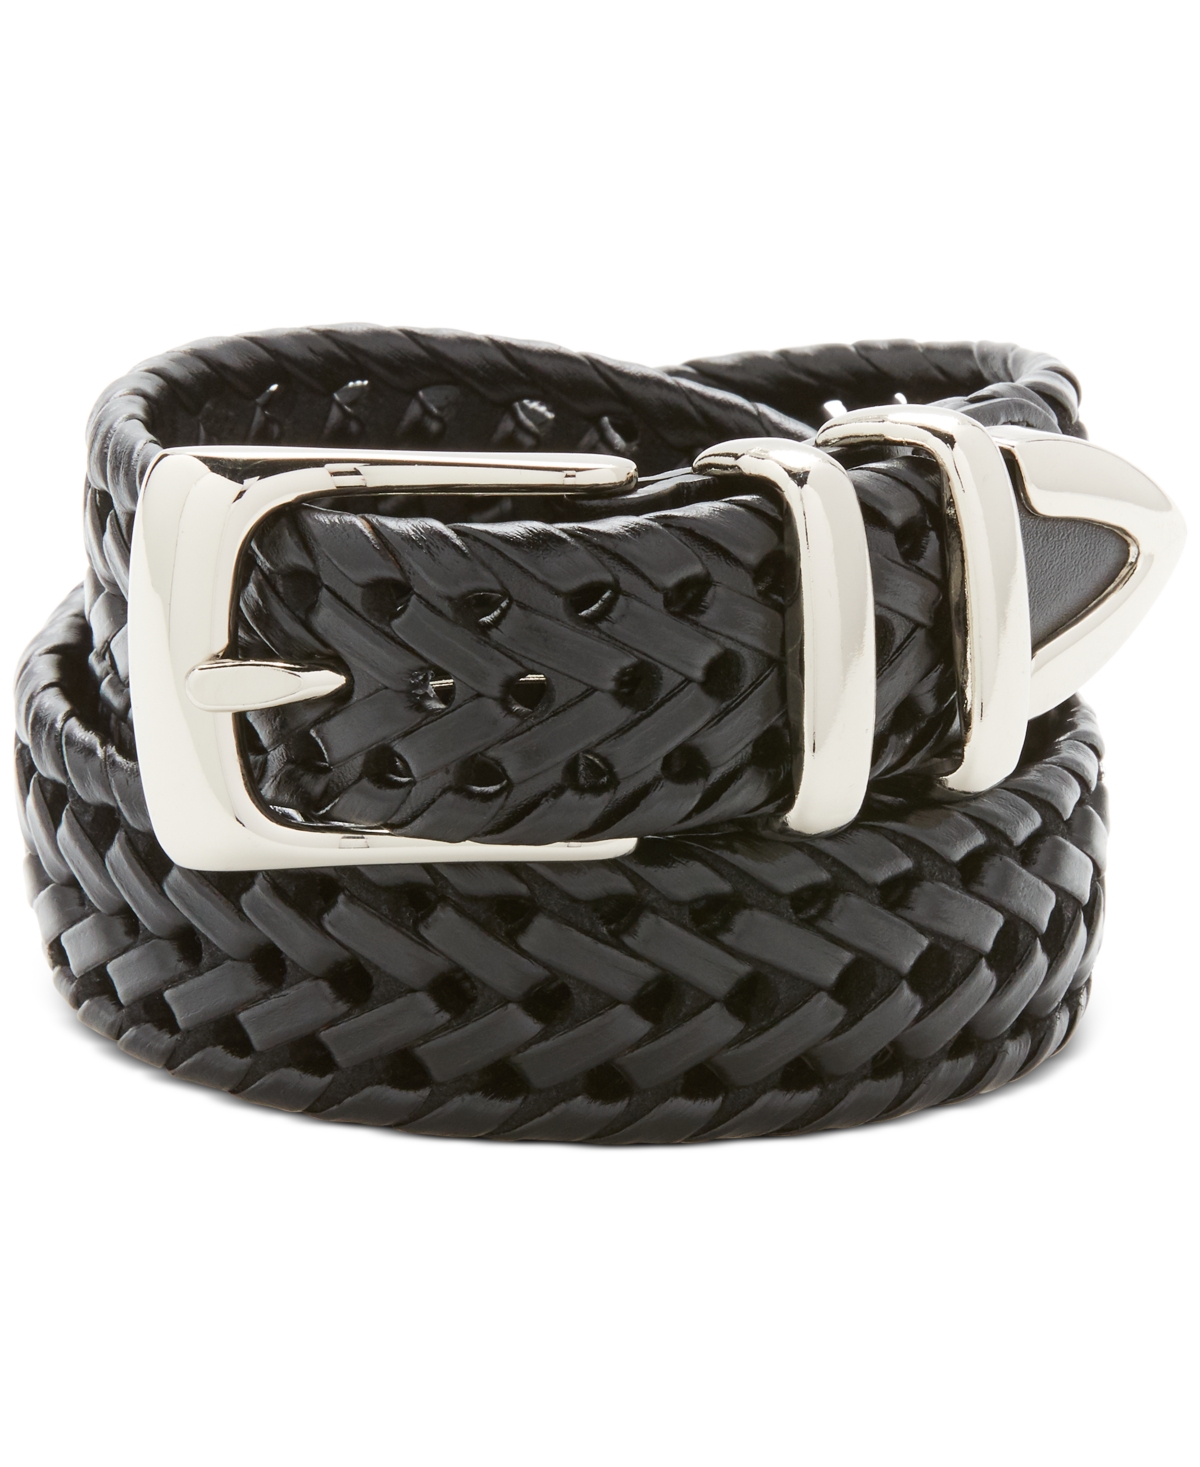 Men's Leather Big and Tall Braided Belt - BLACK